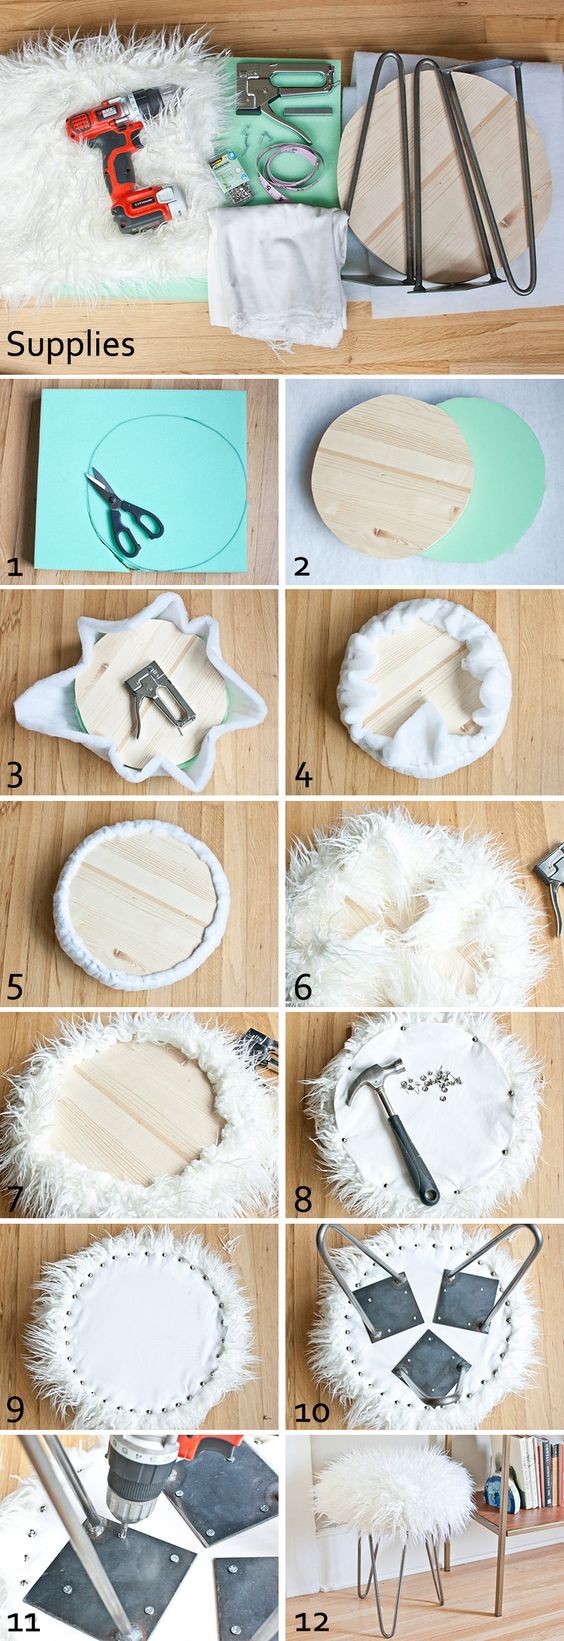 DIY faux fur stool...maybe could expand to benches for the foot of the bed in the girls' room